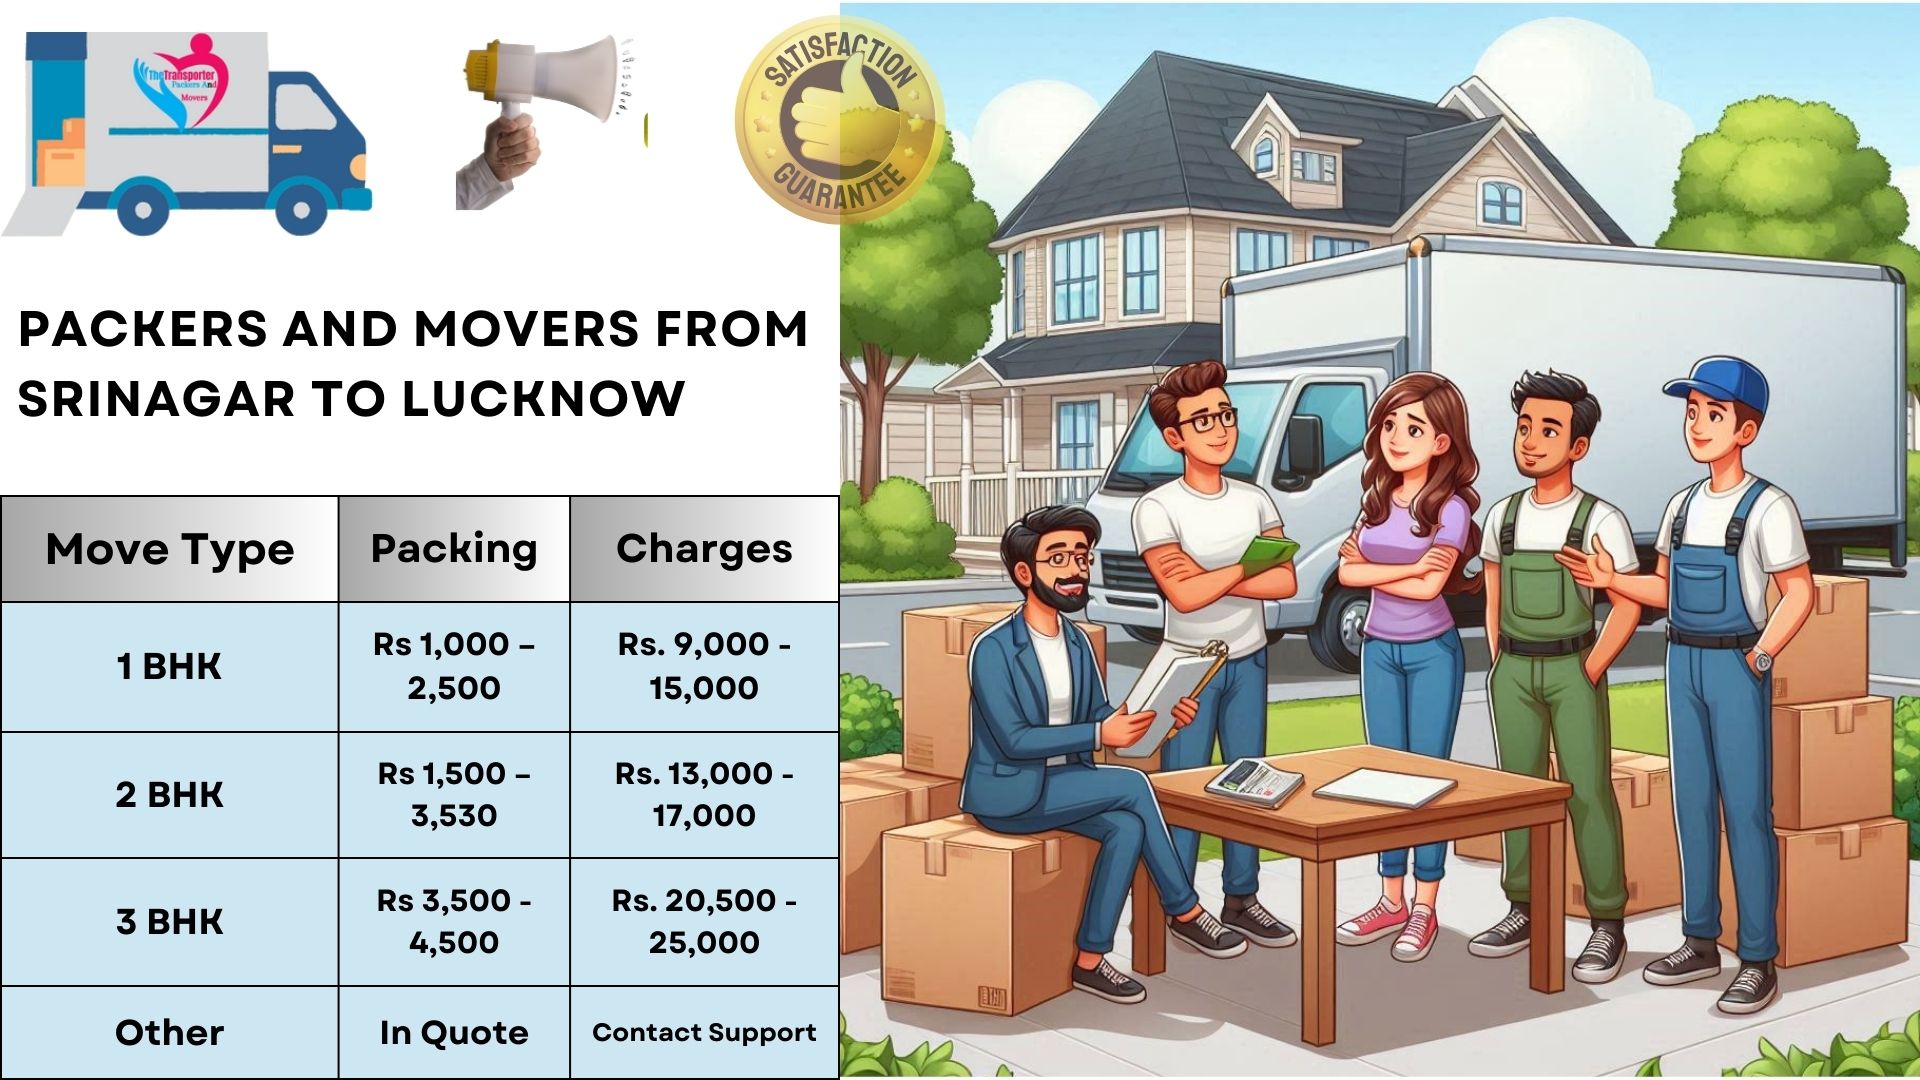 Your household goods shifting from Srinagar to Lucknow